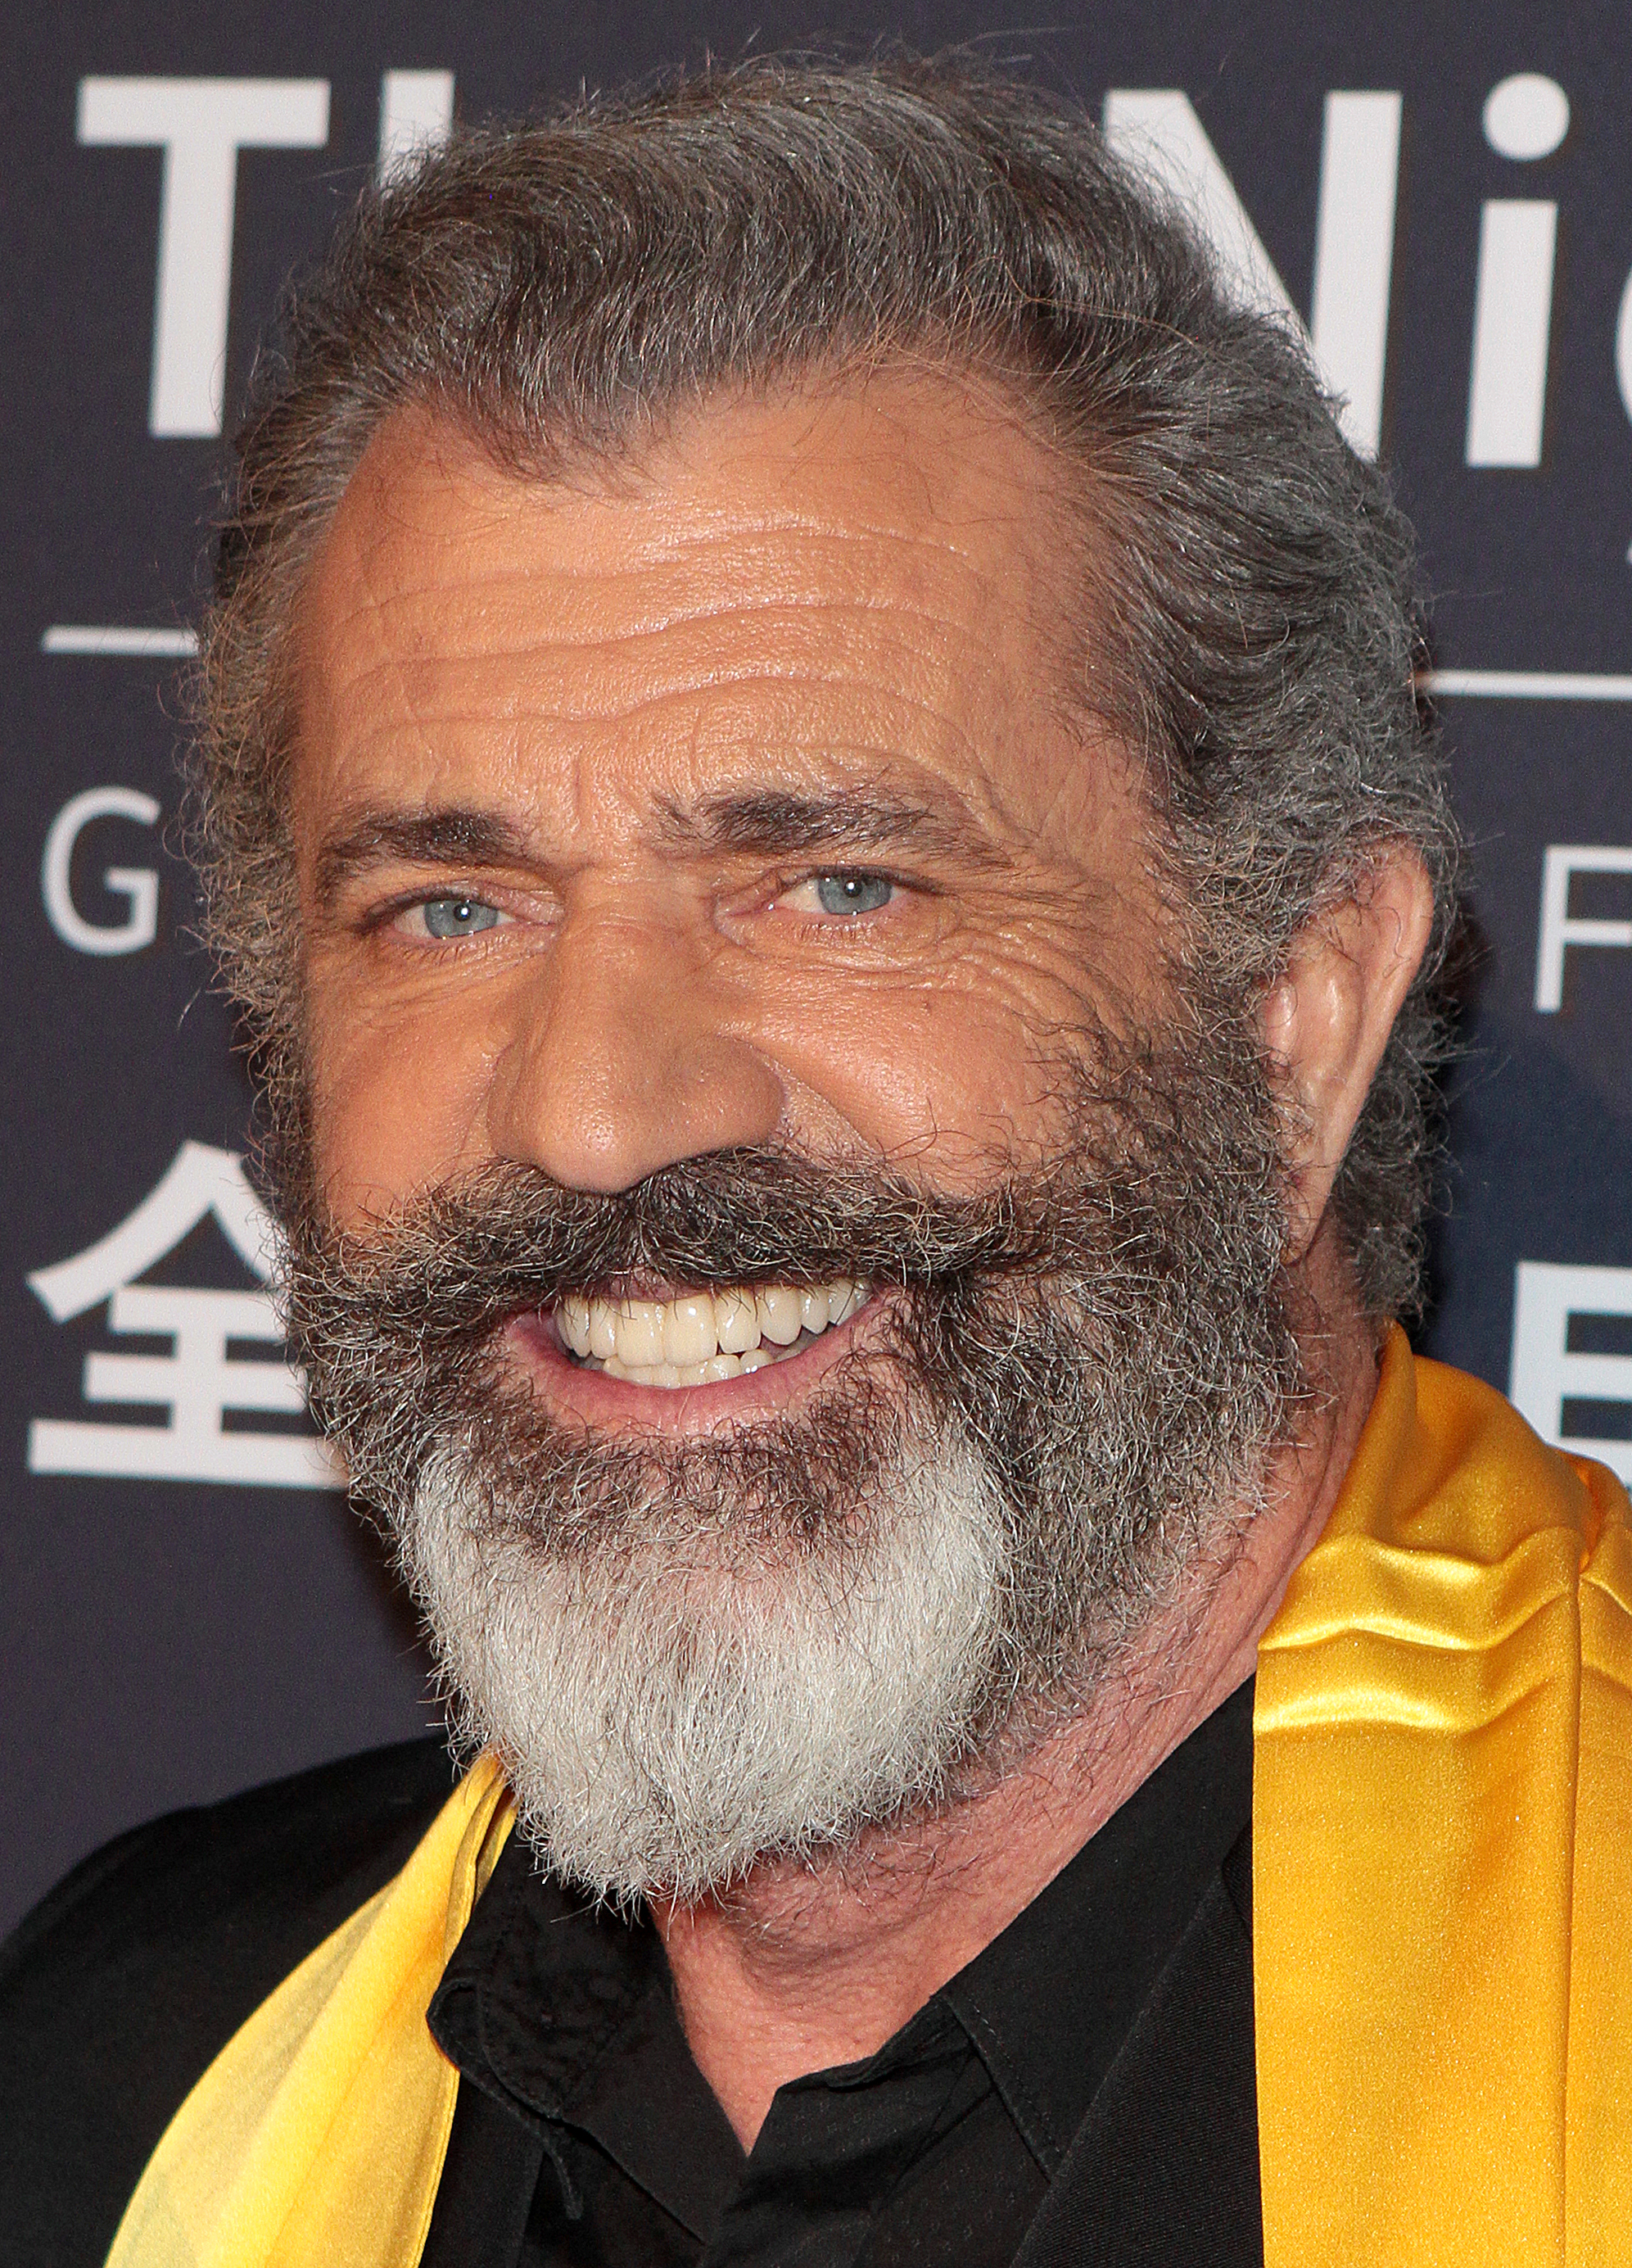 Mel Gibson at the 21st Annual Huading Global Film Awards on December 15, 2016, in Los Angeles, California. | Source: Getty Images